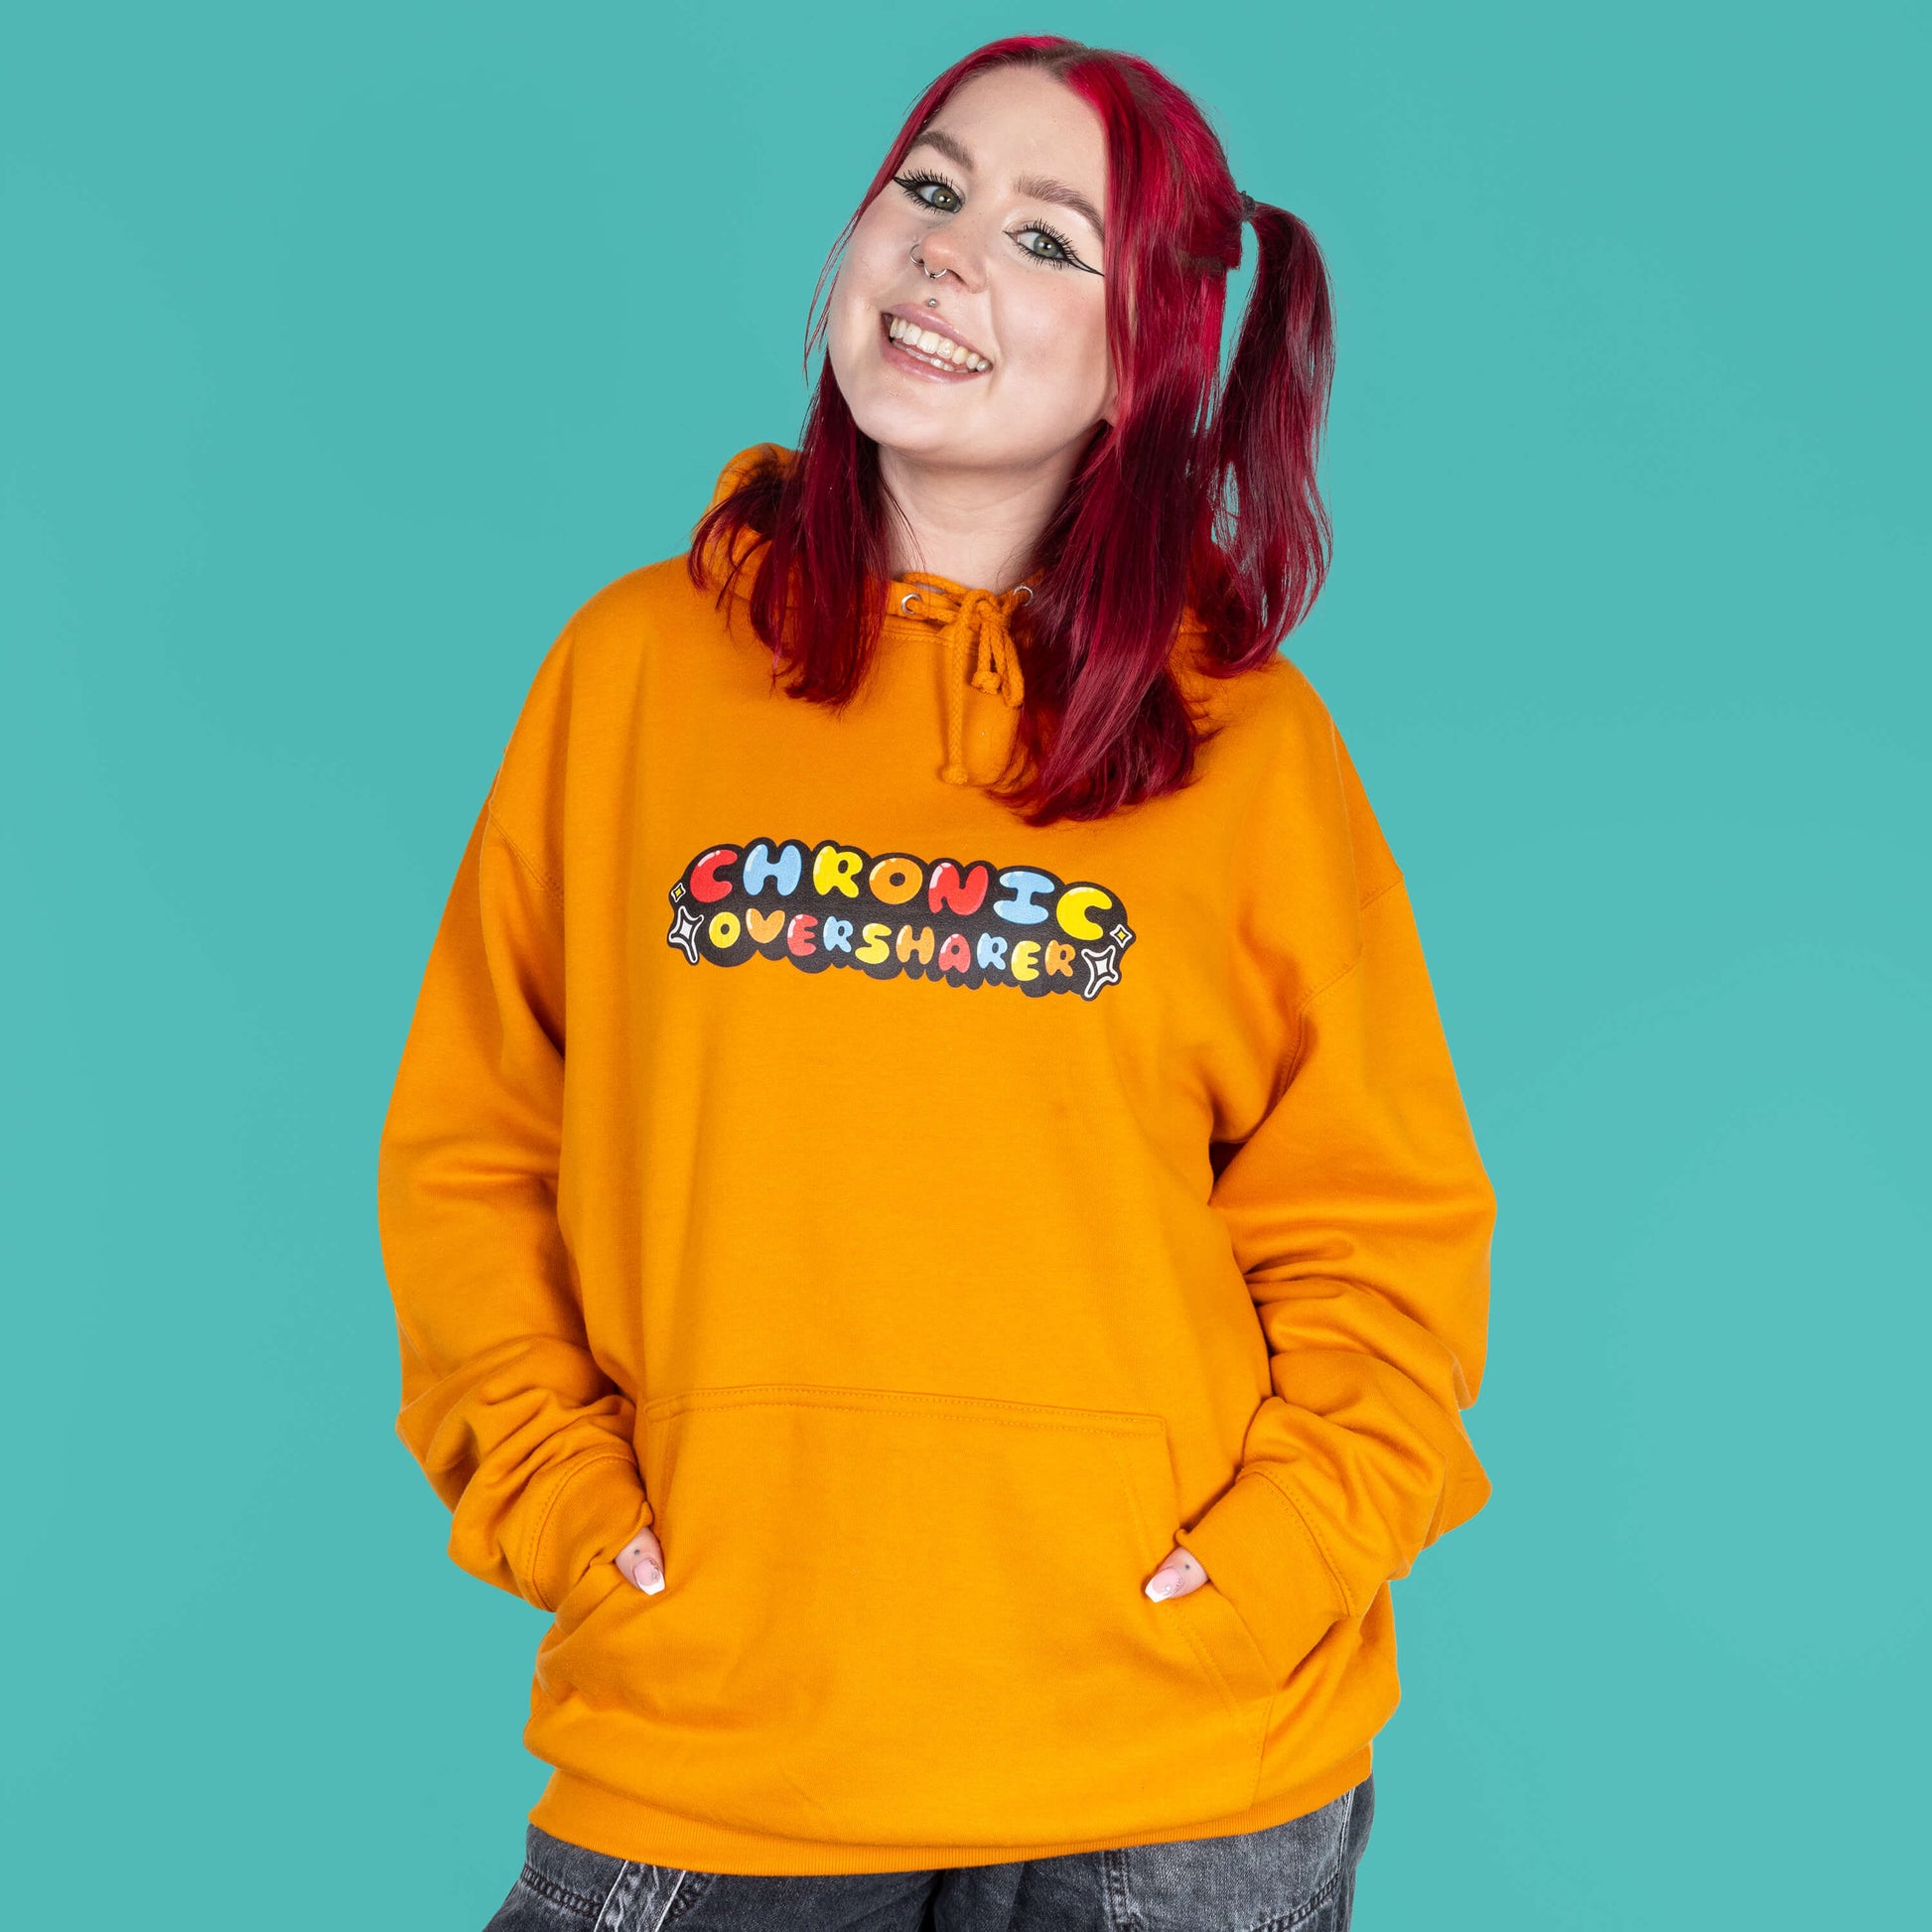 The Chronic Over Sharer Pumpkin Orange Hoodie modelled on Flo, a red haired alternative model, in front of a blue background. She is facing forward smiling with both hands in the front pocket, photo is cropped from the thighs up. The pumpkin orange hoodie features a drawstring hood, a large front pocket and the text 'chronic oversharer' in rainbow bubble font with a black shadow effect and white sparkles. The design was created to raise awareness for neurodivergent disorders such as ADHD.